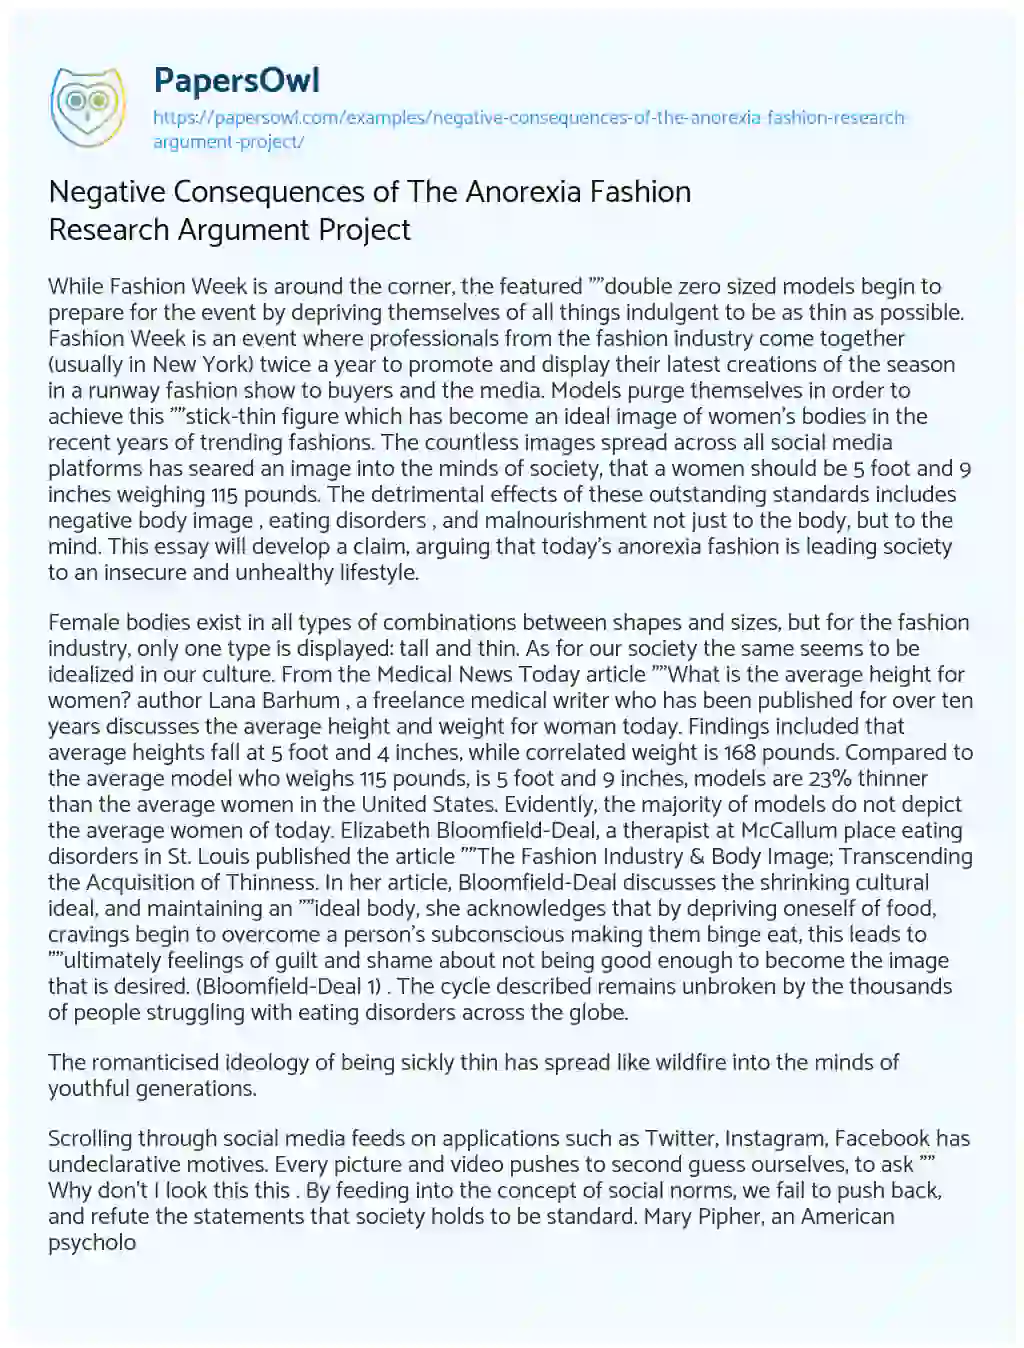 Essay on Negative Consequences of the Anorexia Fashion Research Argument Project